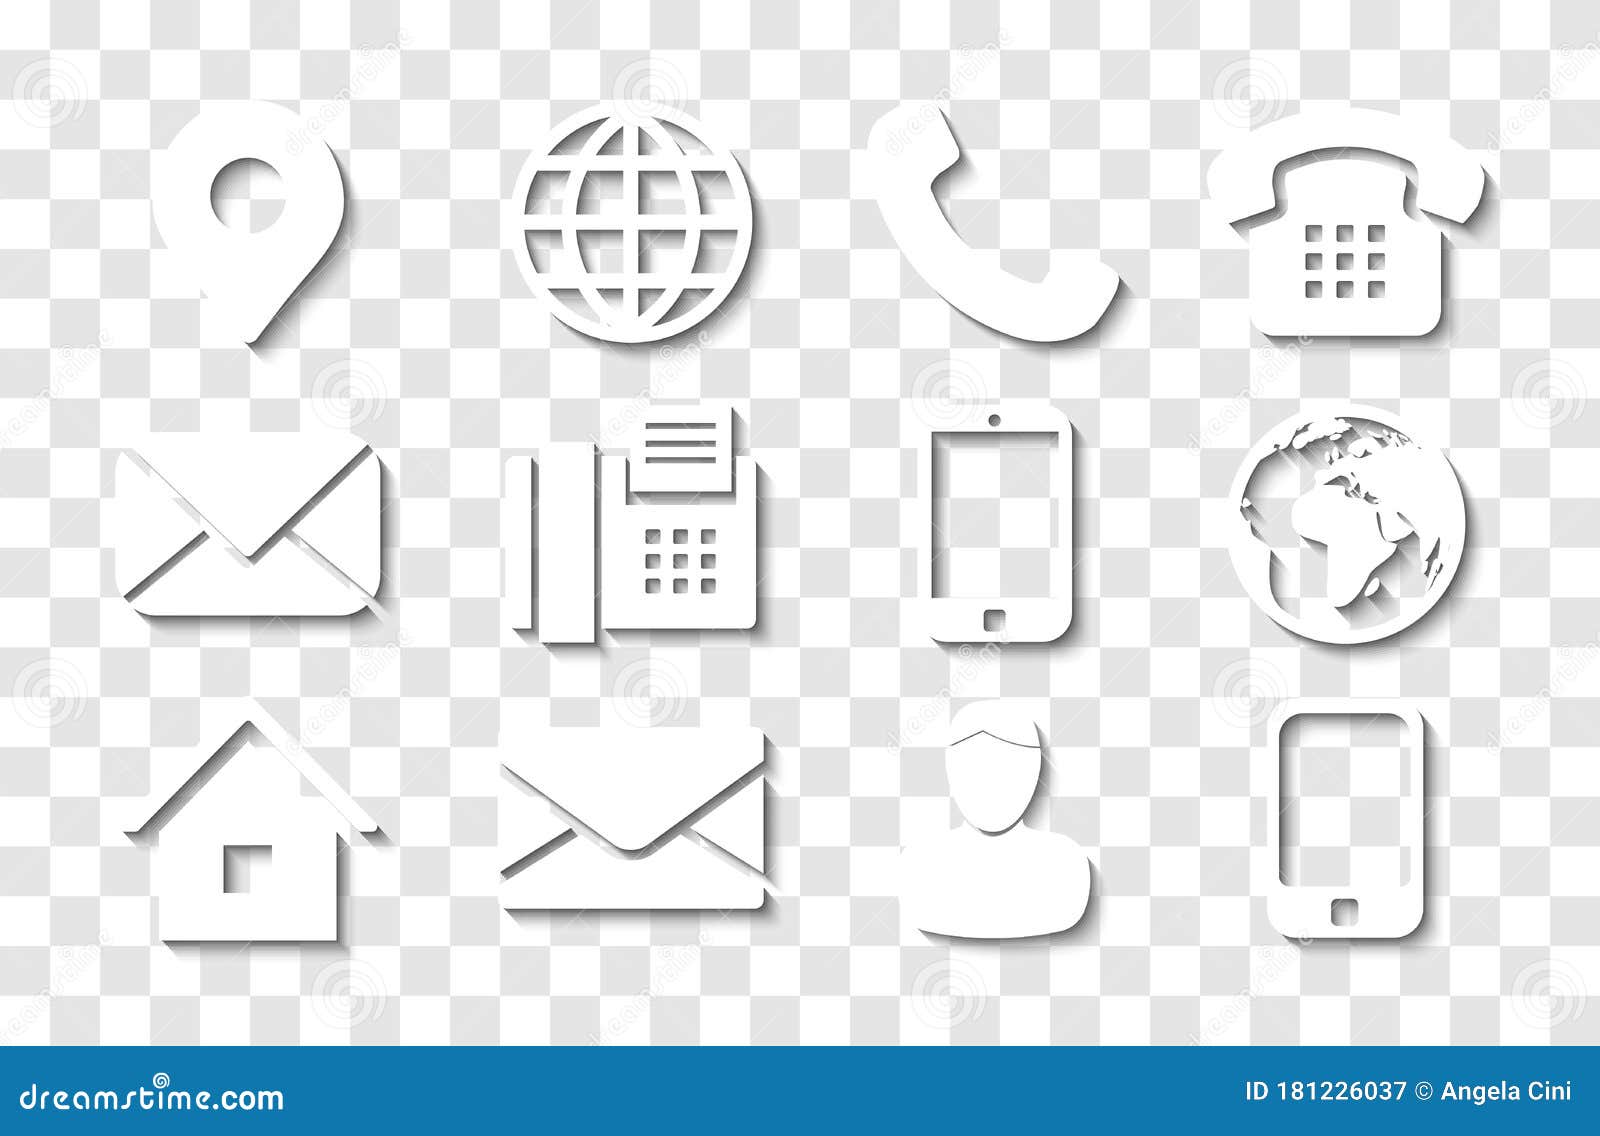 white contact info icon set with shadows for location pin, phone, fax, cellphone, person and email icons